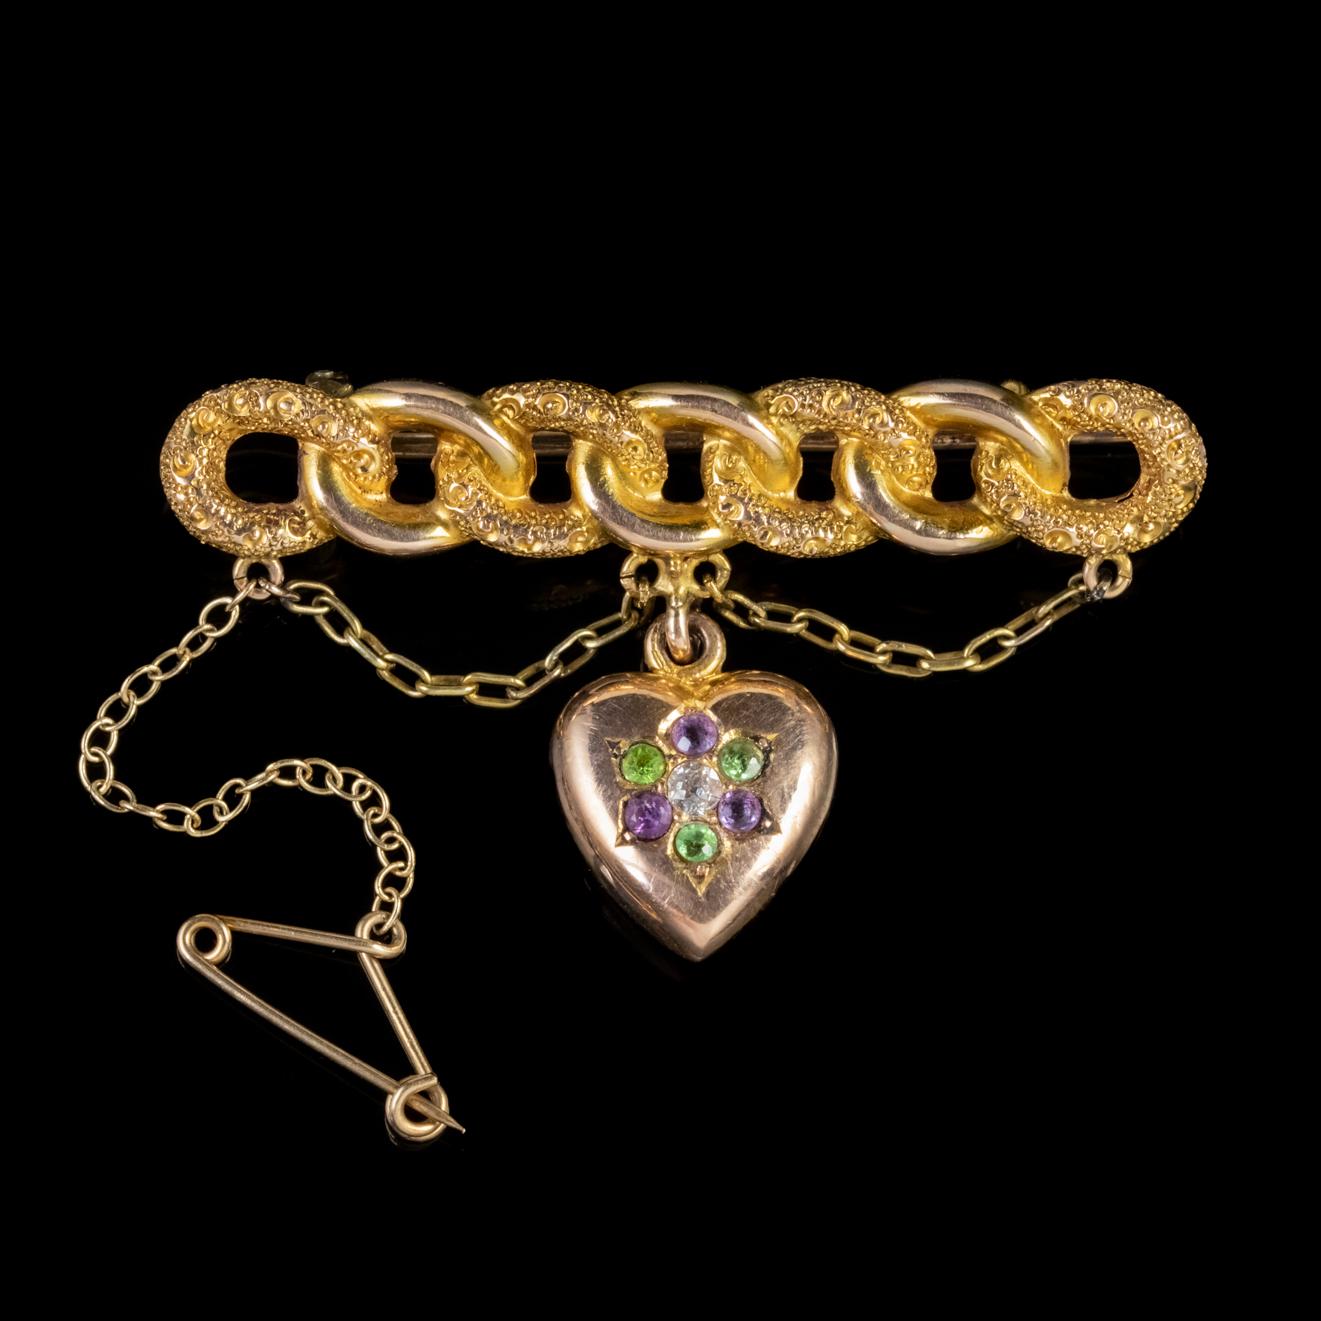 A fabulous Antique Edwardian Suffragette brooch featuring a solid 15ct Yellow Gold chain link gallery with two hanging chains and a lovely Rosy 9ct Gold heart decorated with 0.05ct Peridots, Amethysts and a central 0.08ct Diamond. 

Suffragettes